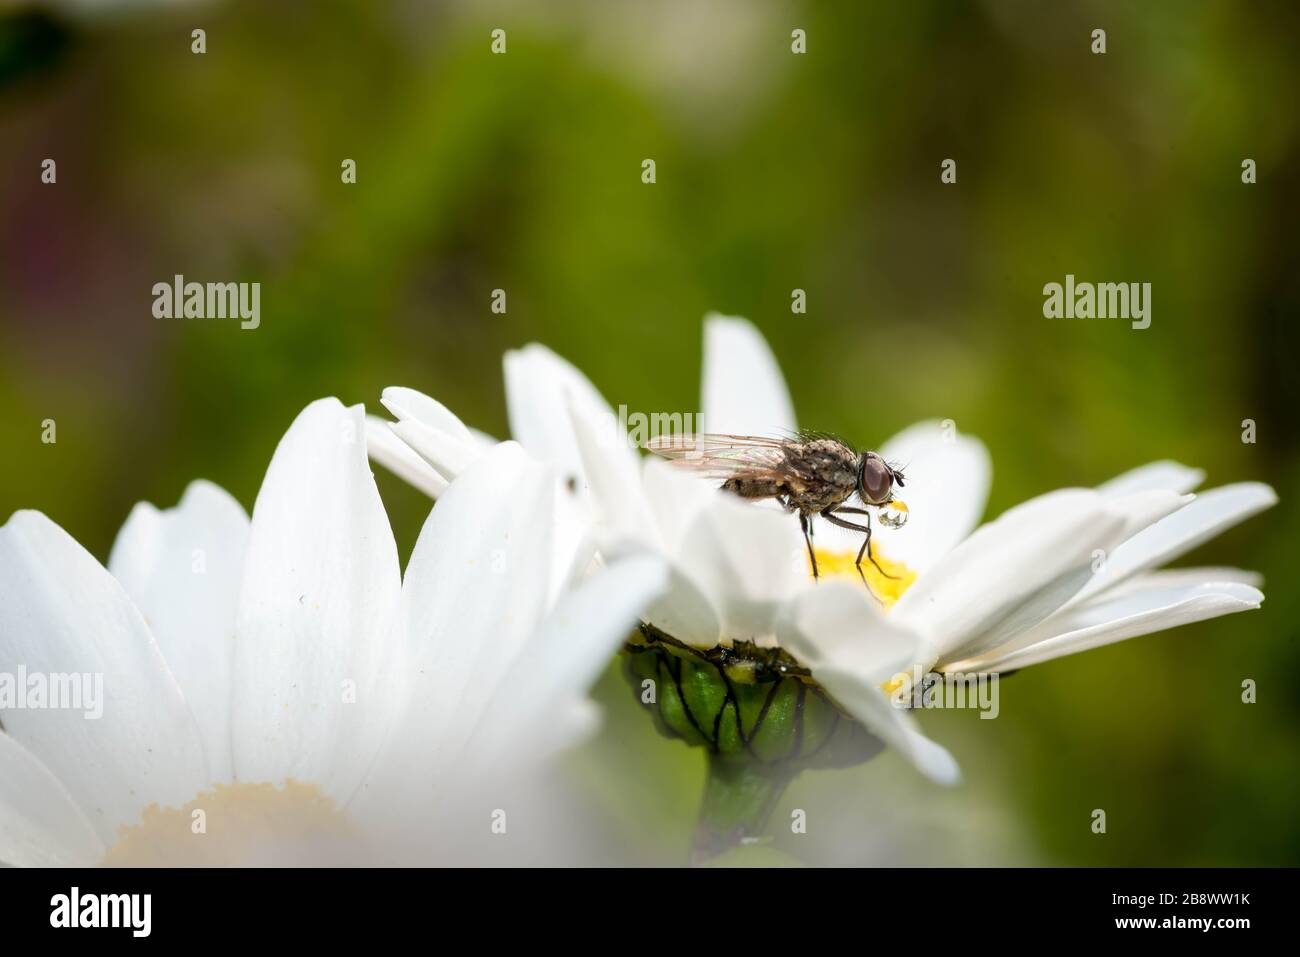 Macro shot of a honey bee collecting nectar on a white English daisy flower. Stock Photo